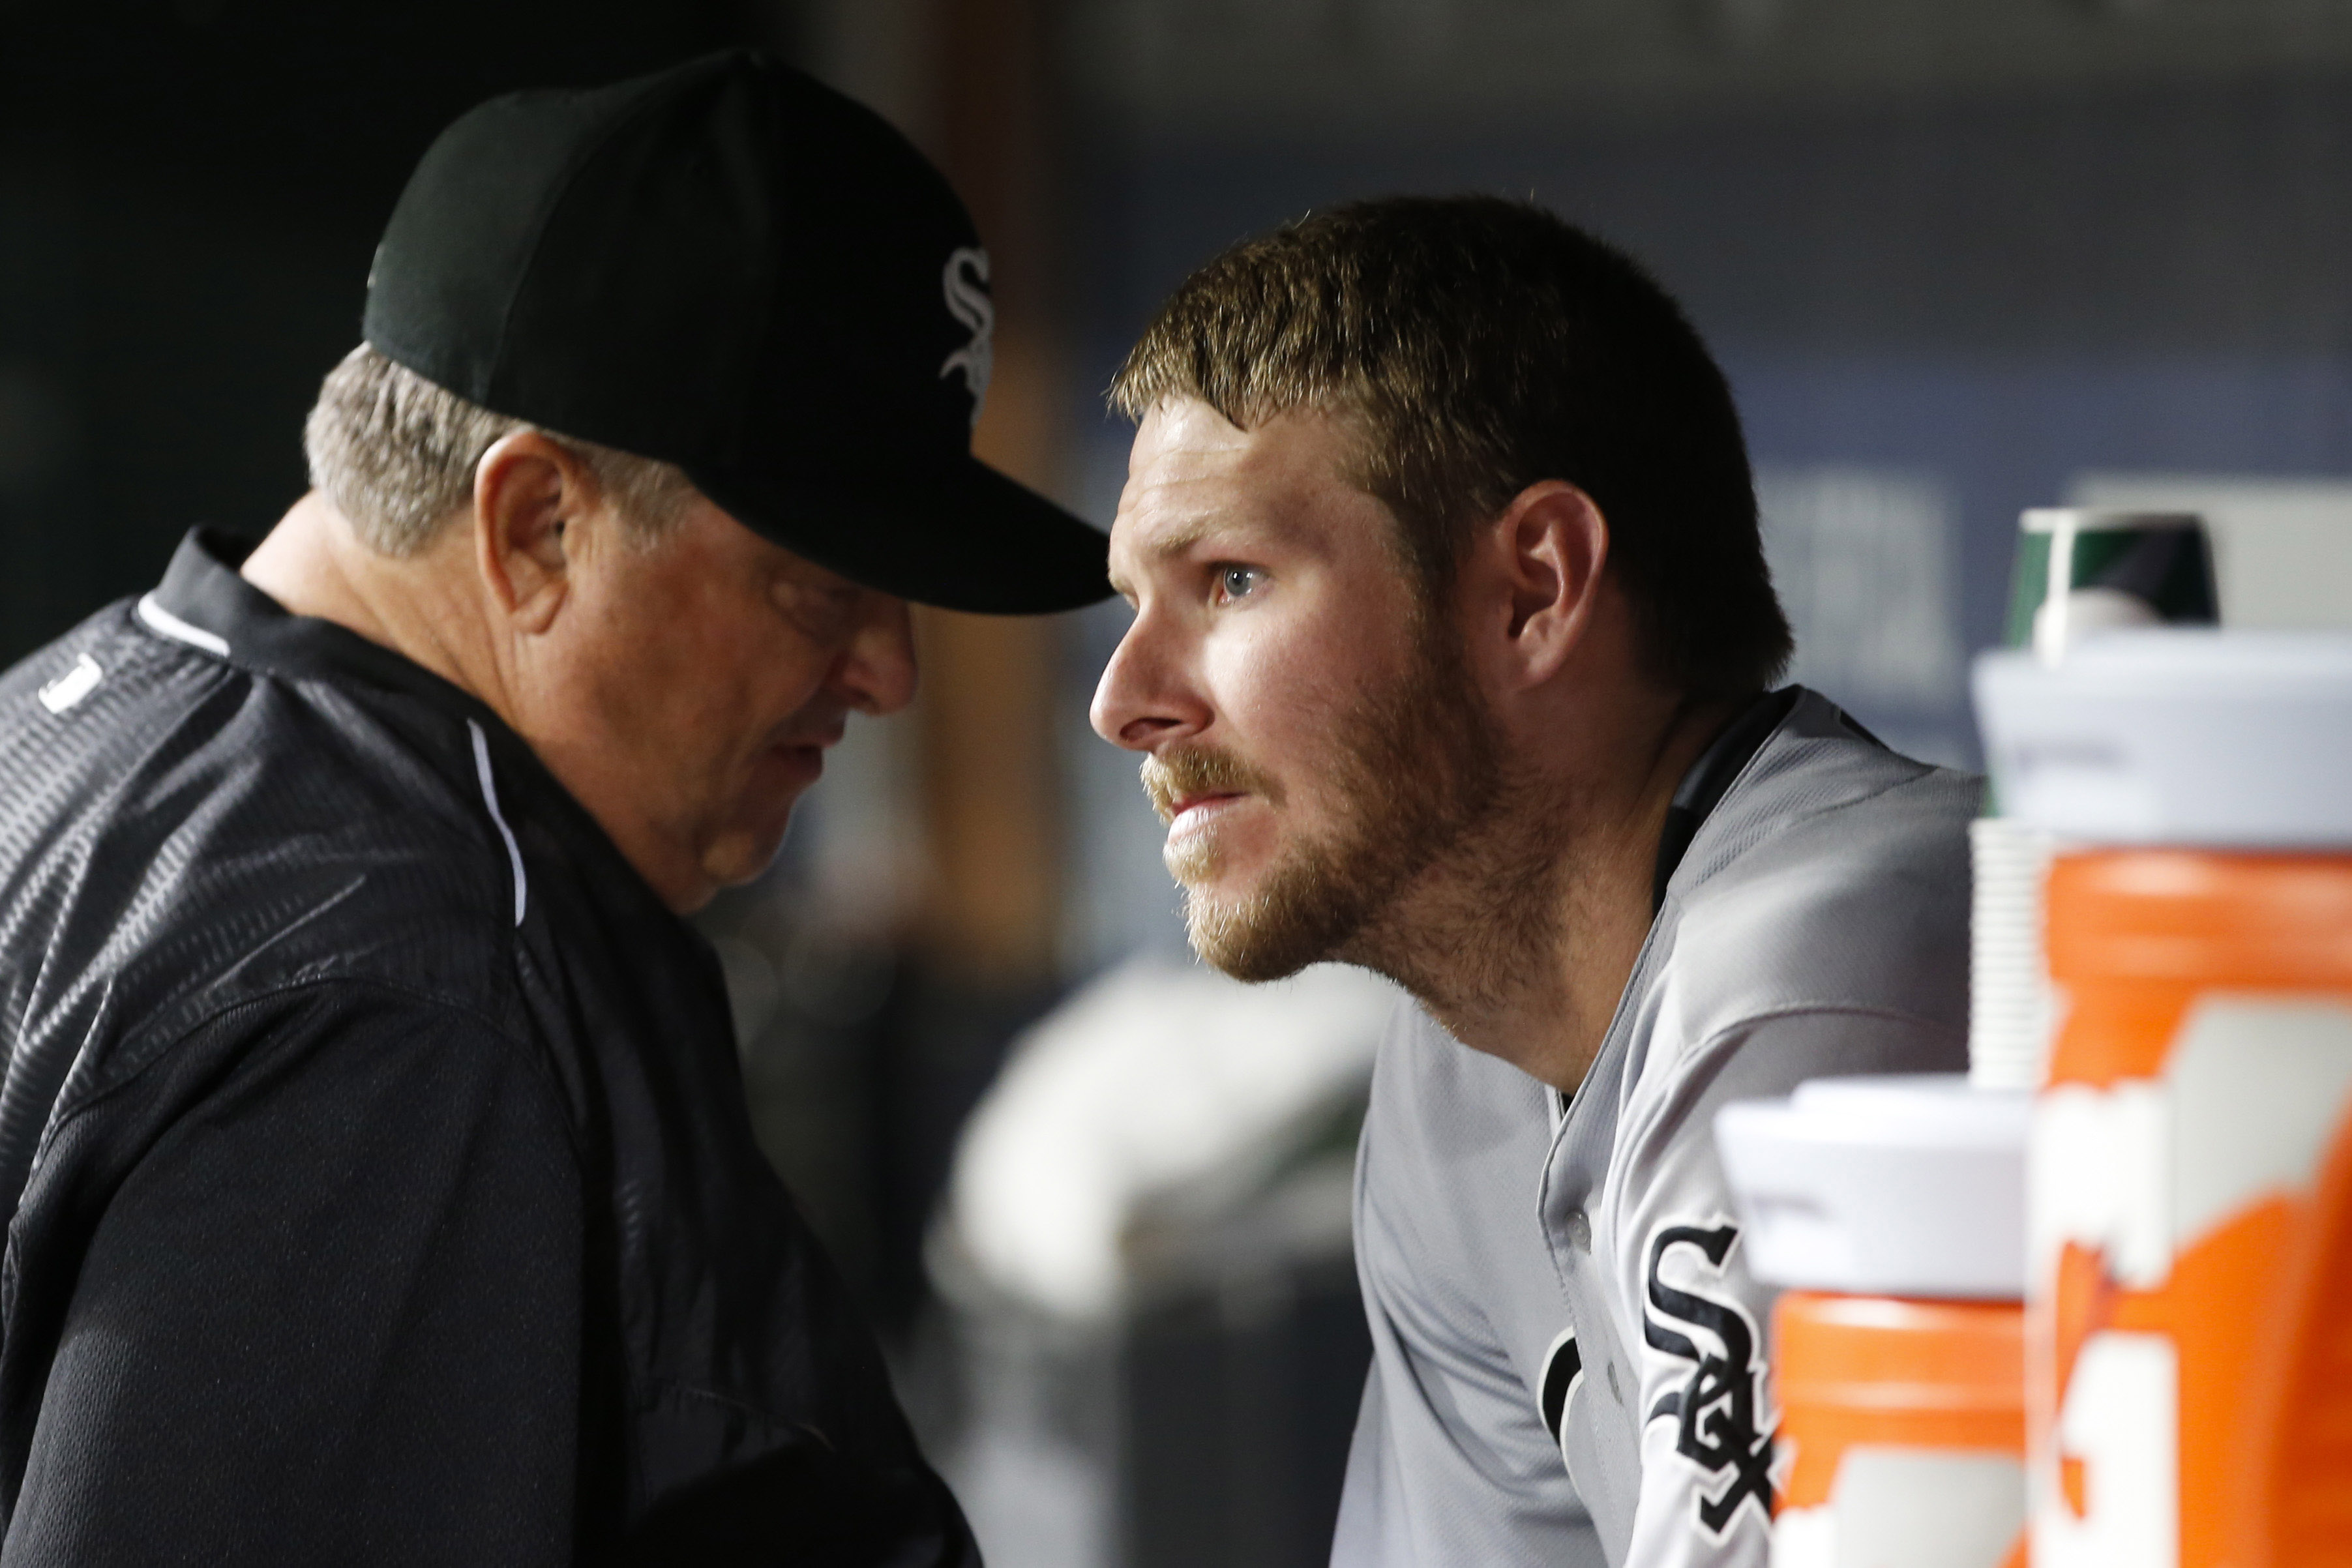 Chris Sale Suspended by White Sox After Clubhouse Incident